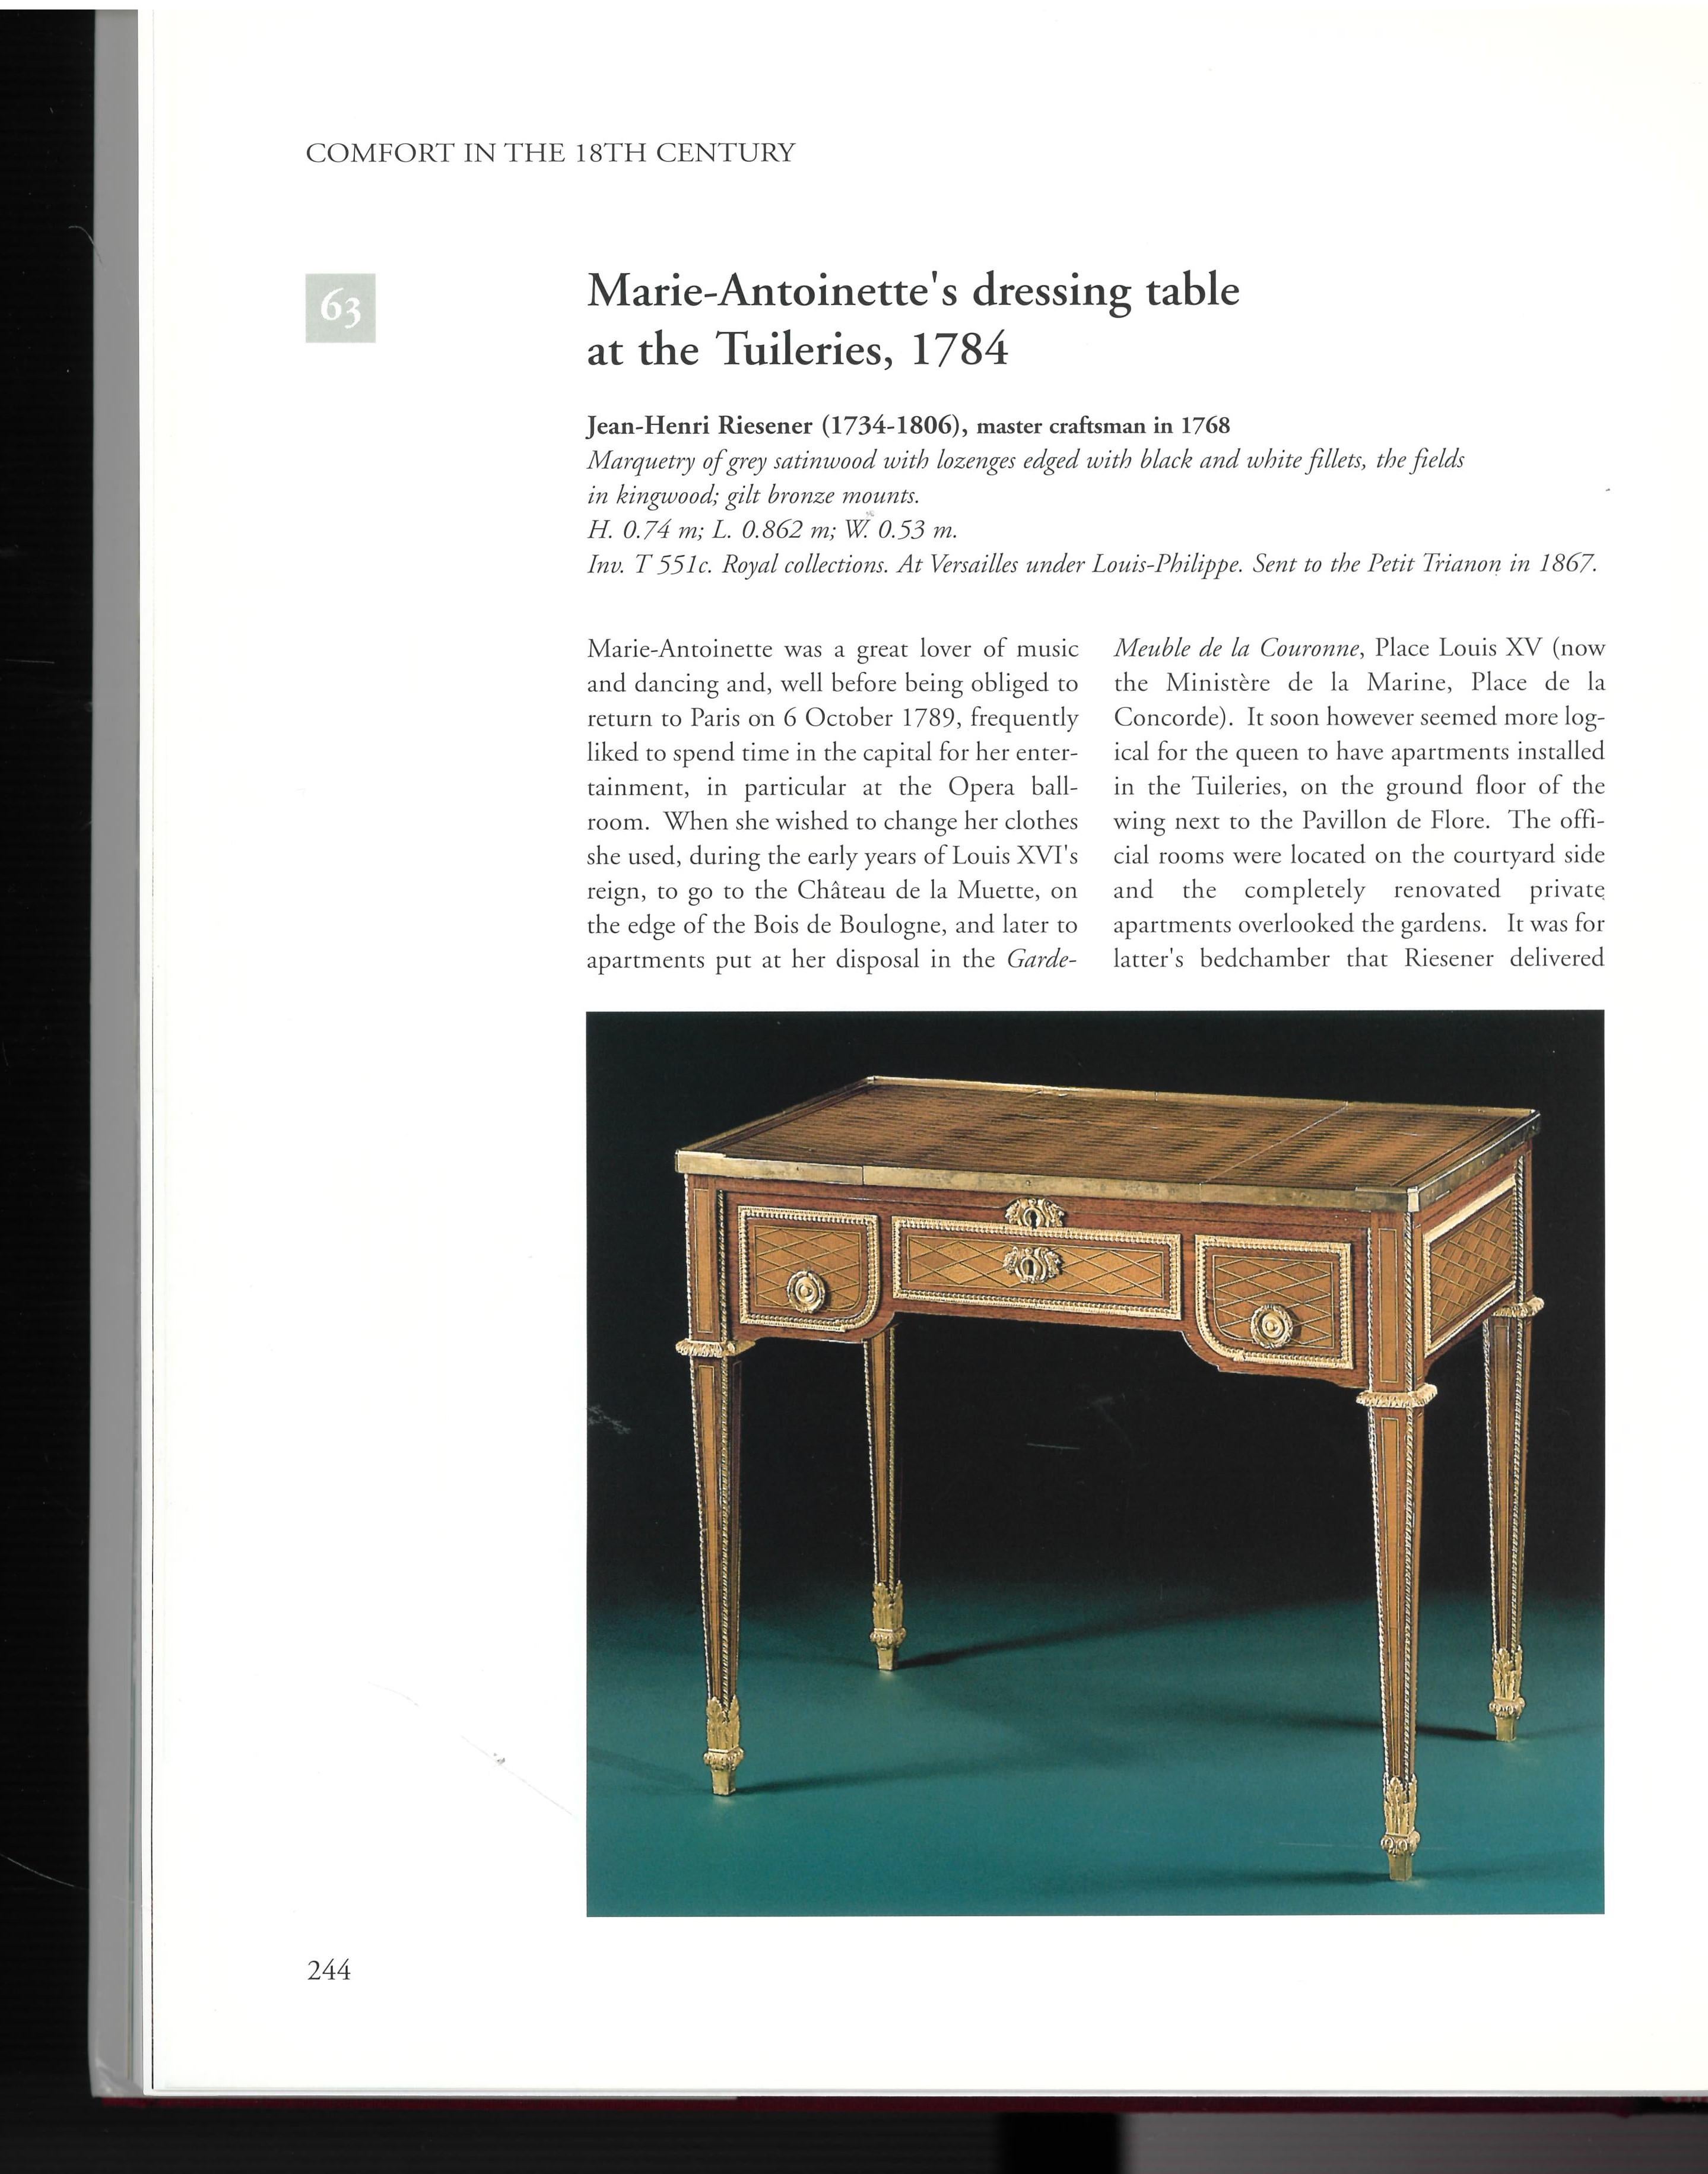 Paper The Furniture of Versailles, 17th and 18th Centuries '2 Volume Box Set' (Book) For Sale